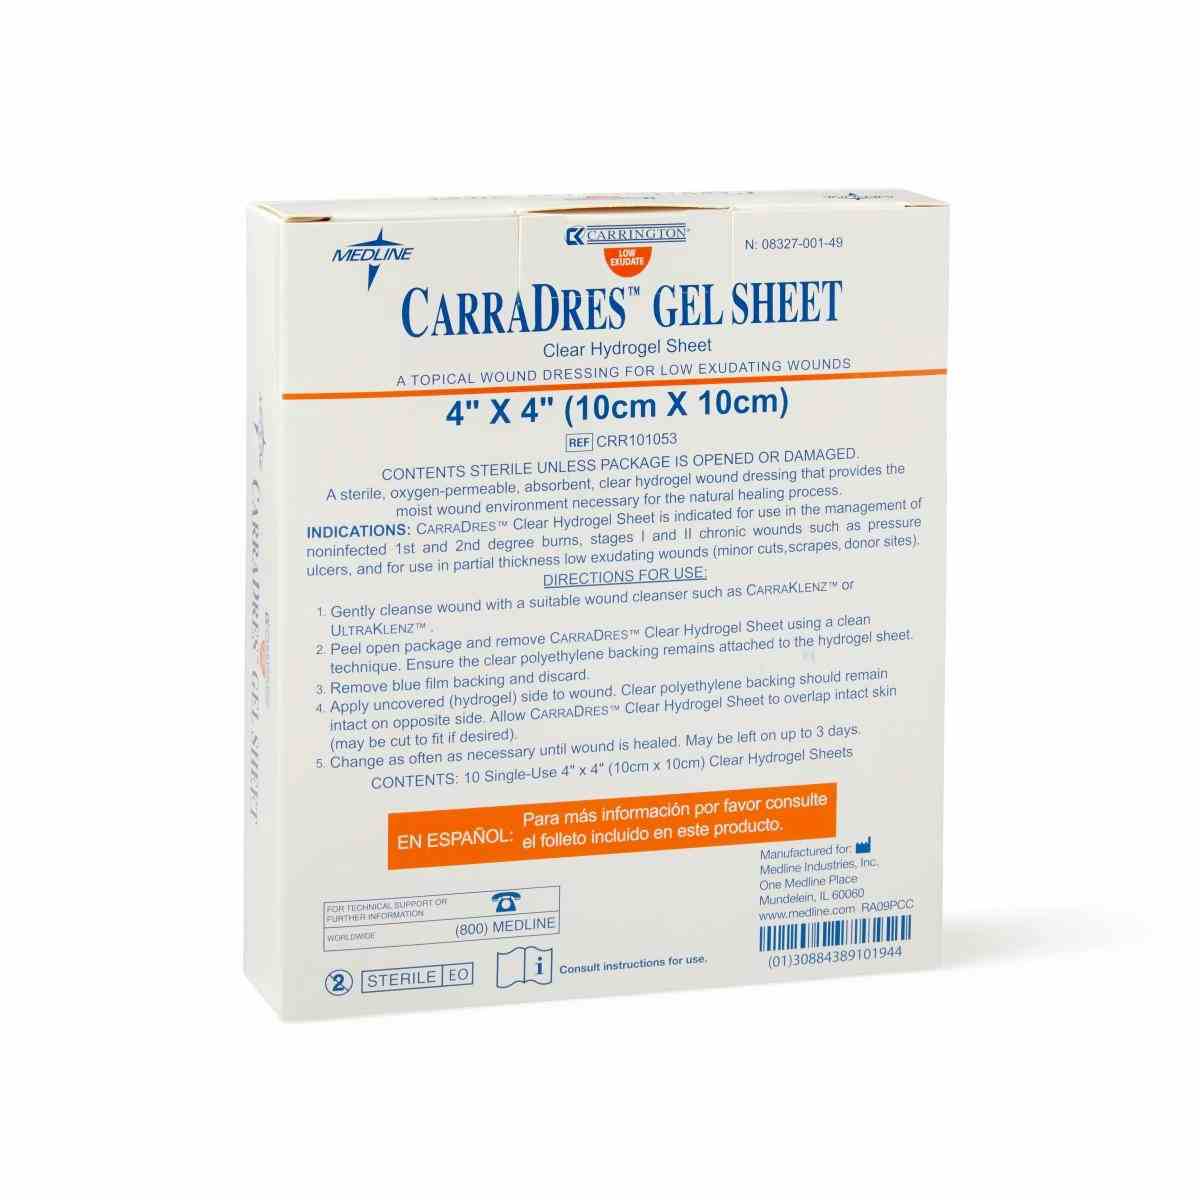 CarraDres Clear Hydrogel Sheets, 4" X 4"
, CRR101053Z, Box of 10 